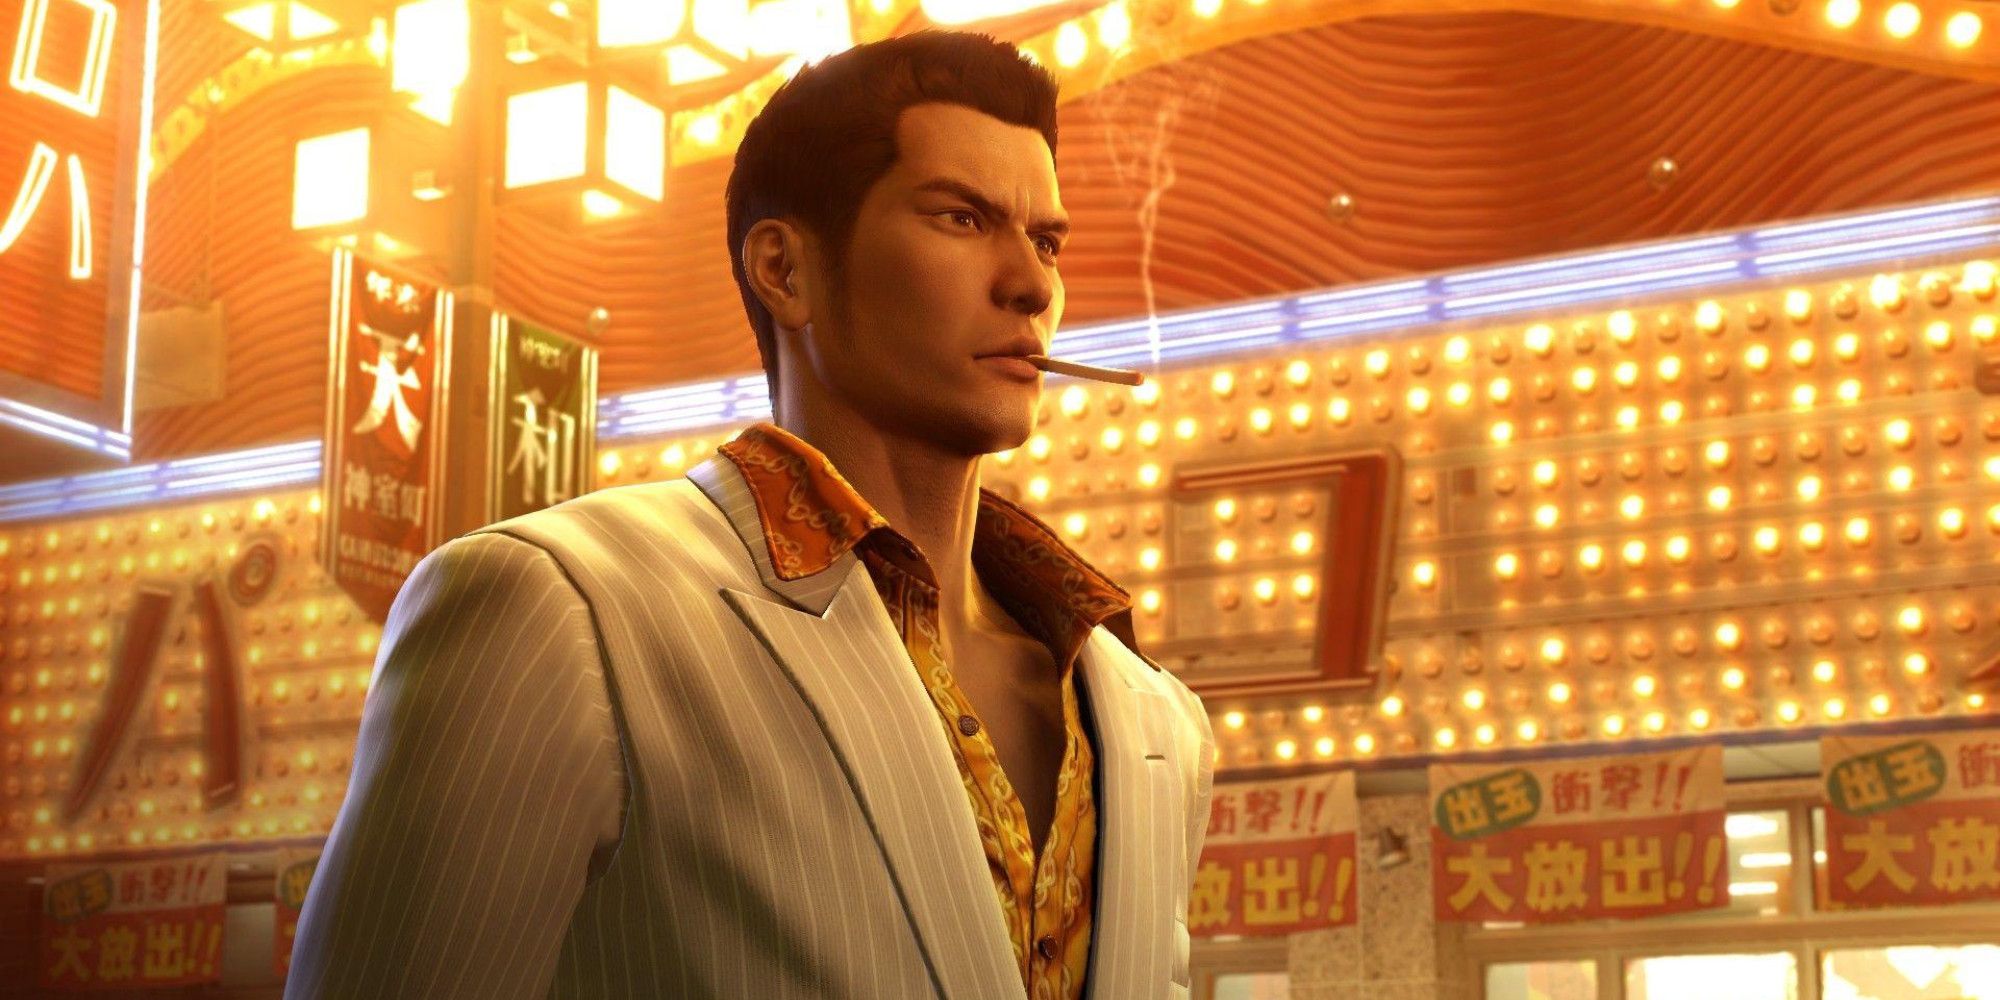 Kiryu walking the city streets in Yakuza 0 with a cigarette in his mouth